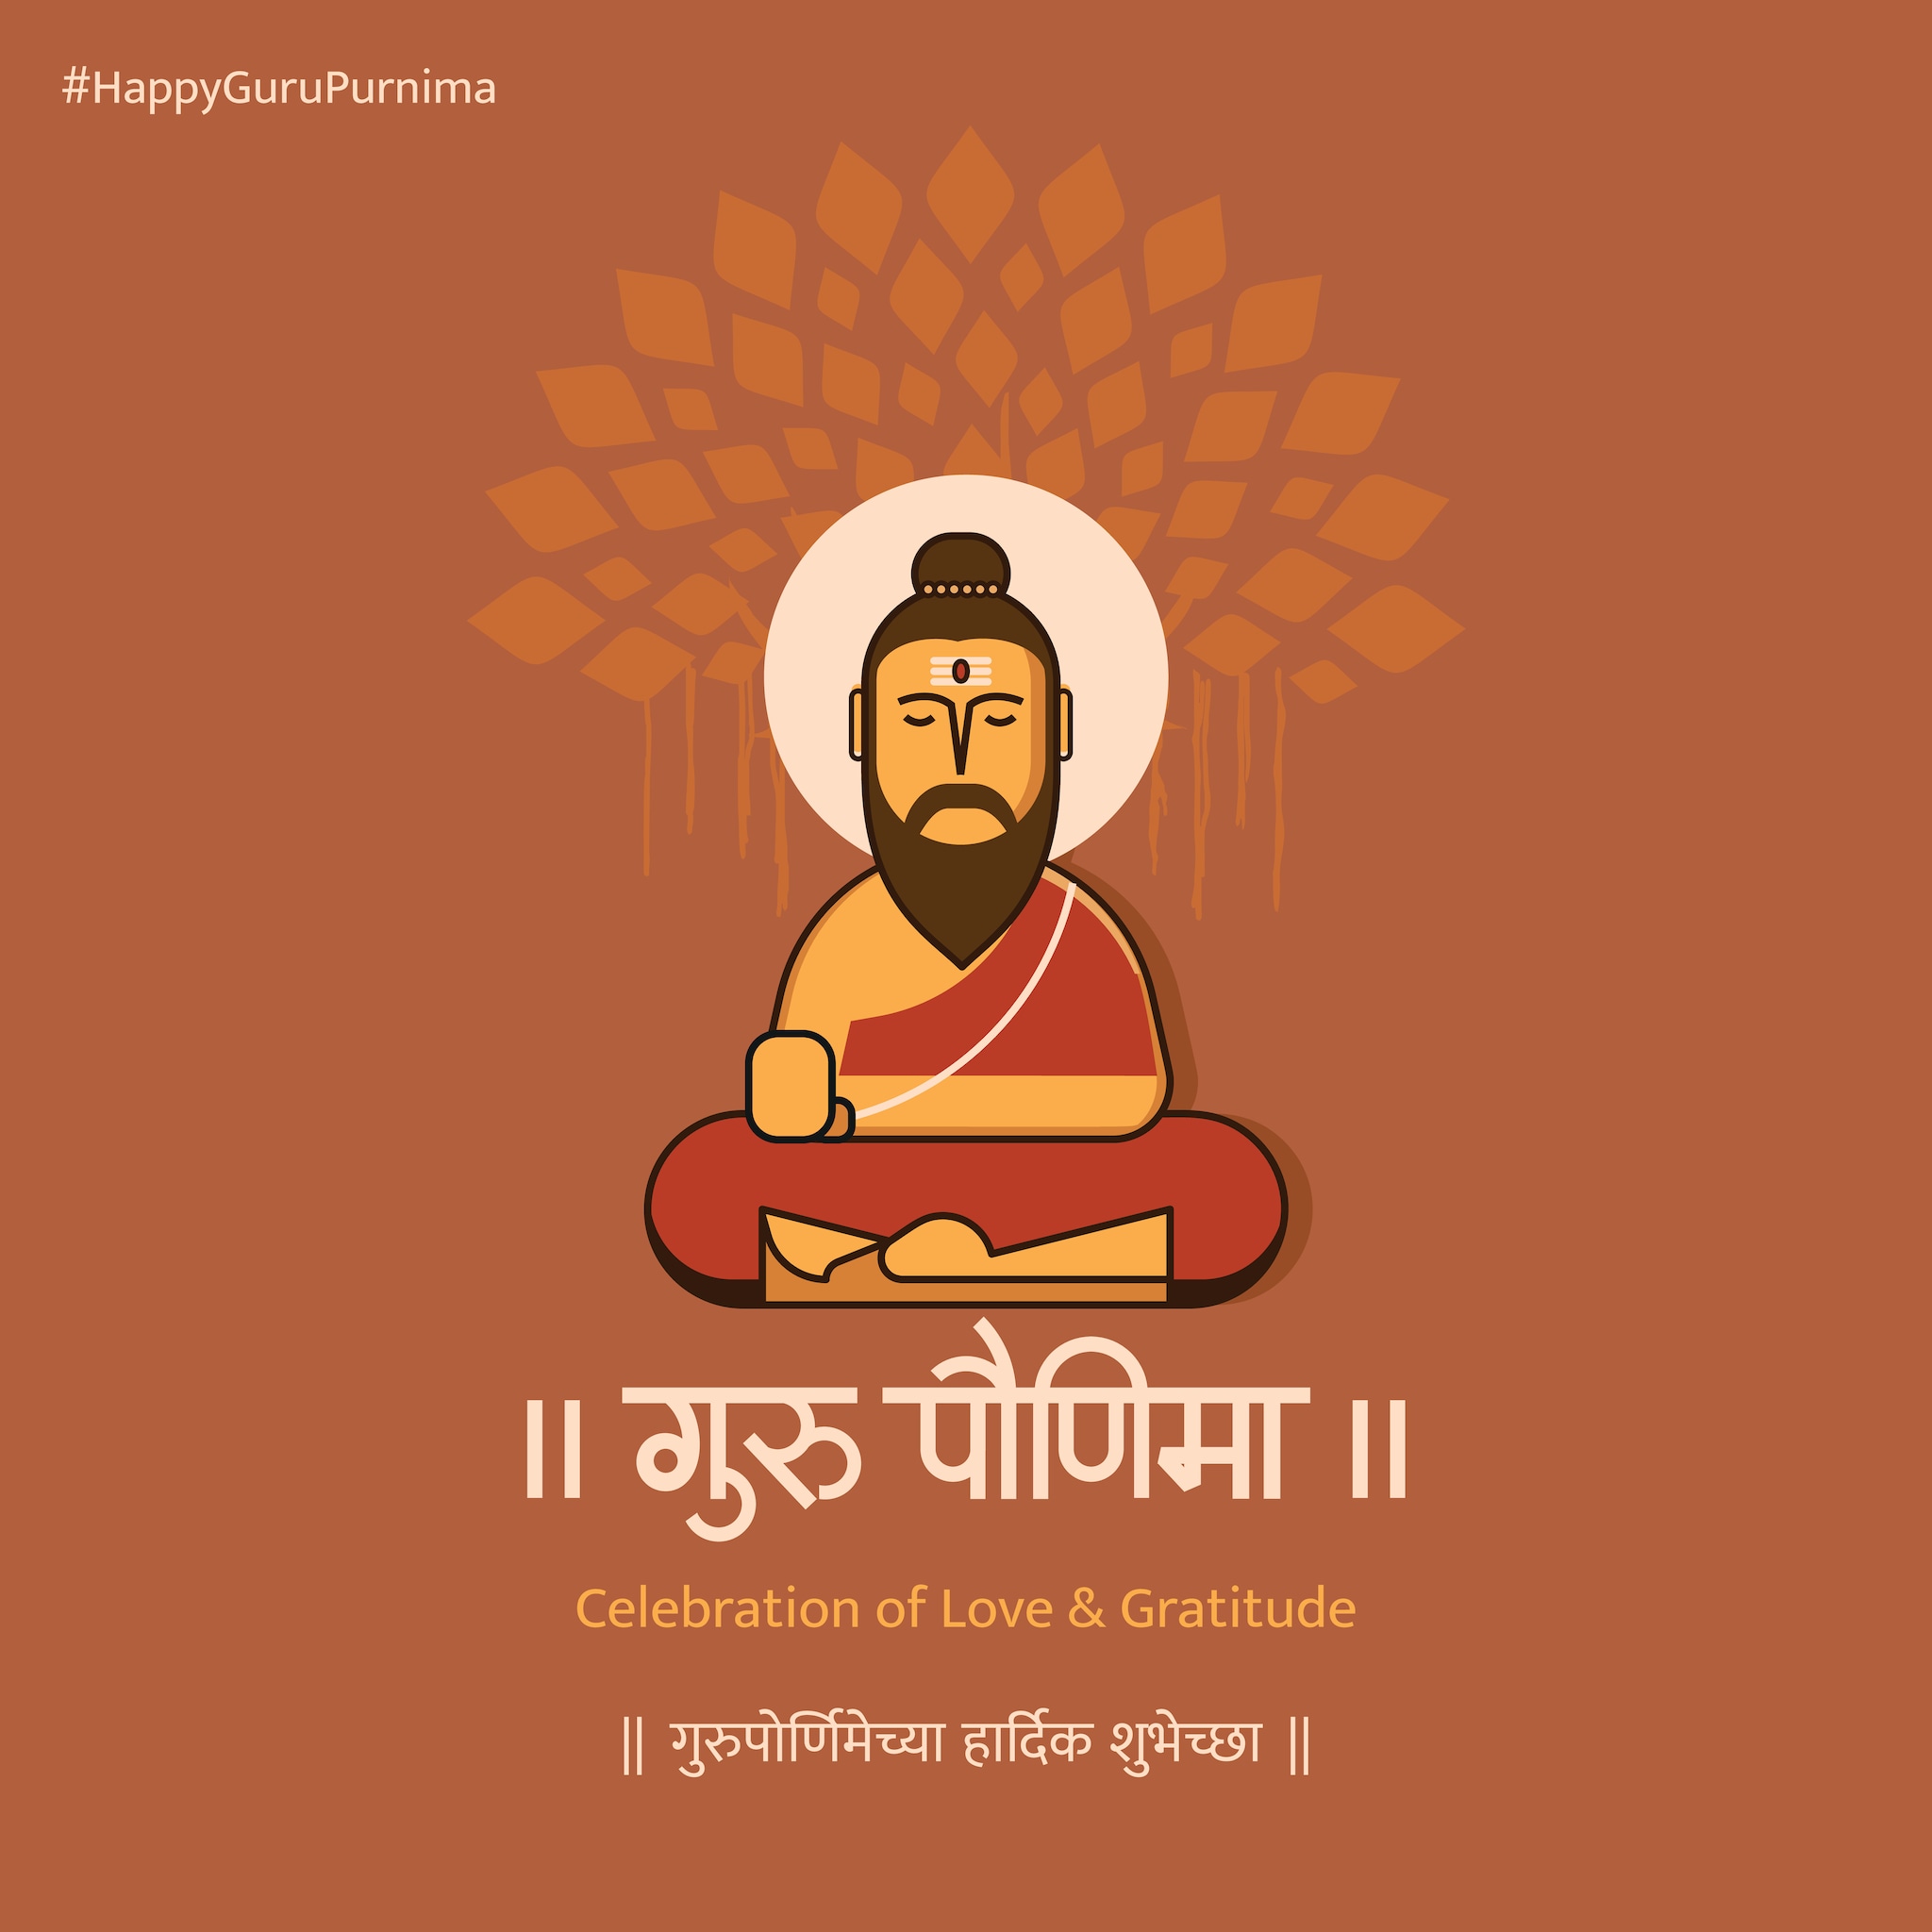 Happy Guru Purnima 2022 Wishes, Greetings, WhatsApp Status, Images and Quotes that you can share with your loved ones.  (Image: Shutterstock) 